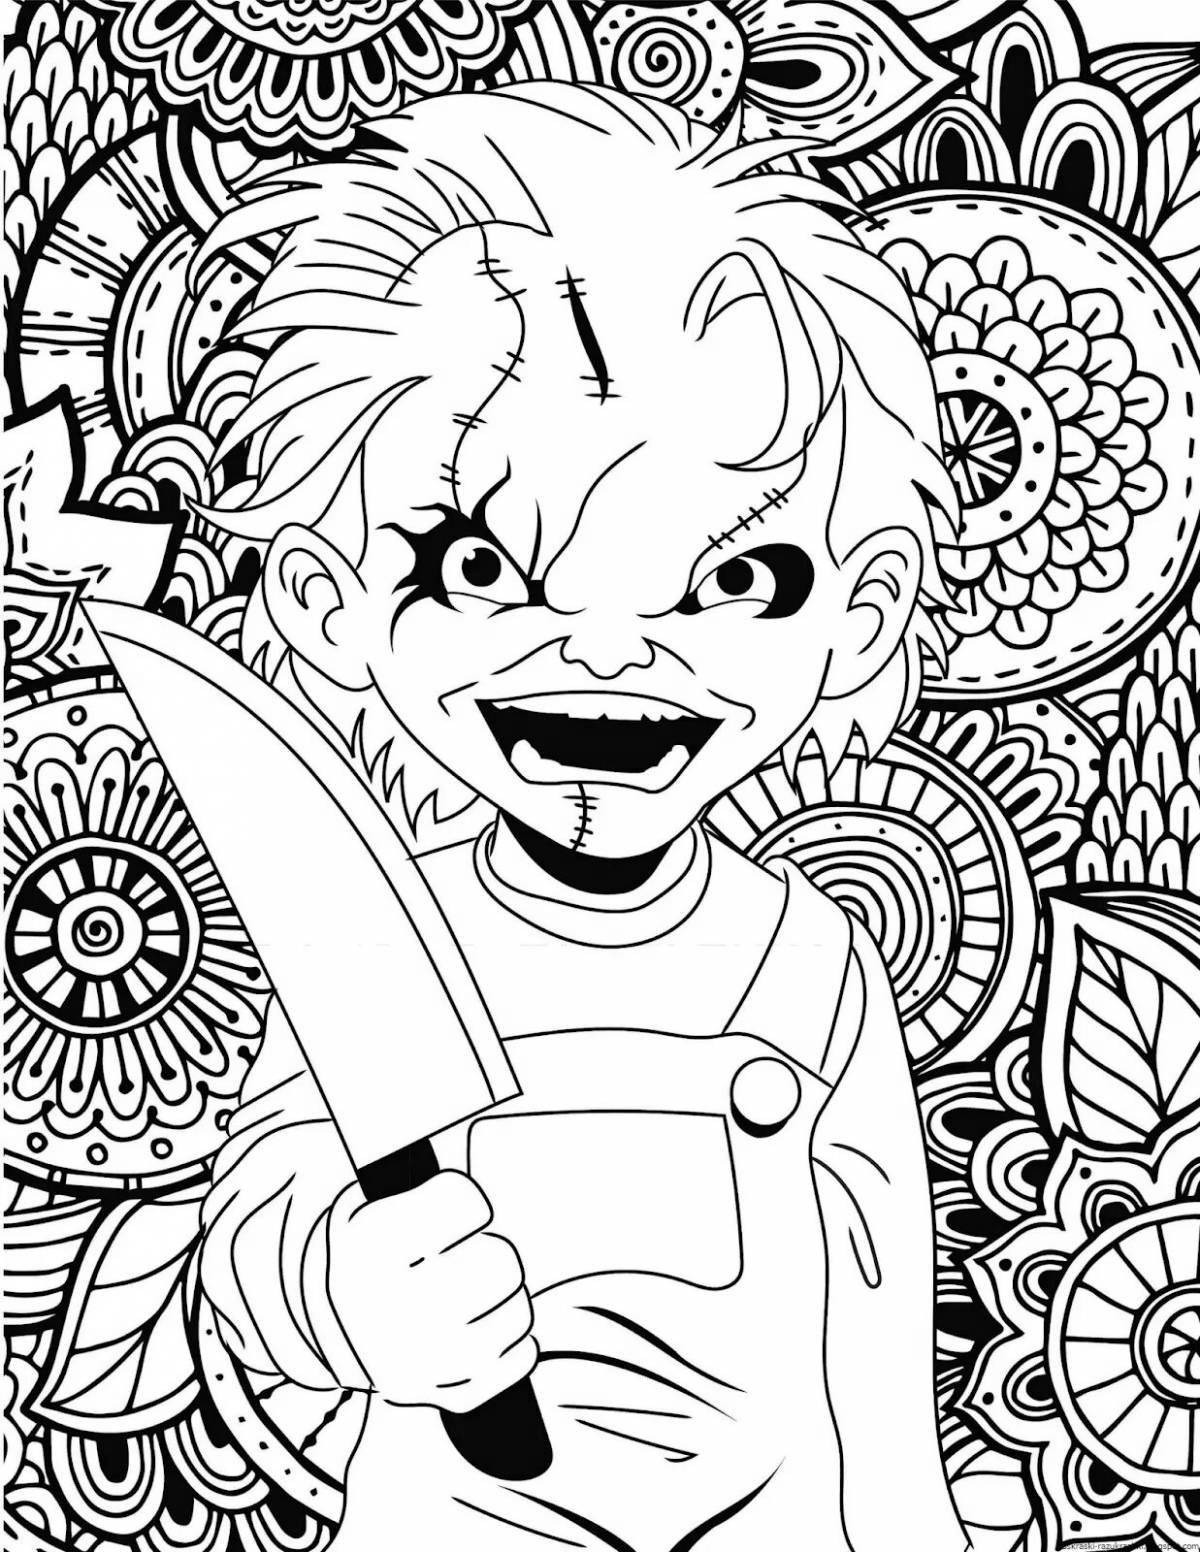 Coloring book angry scary child